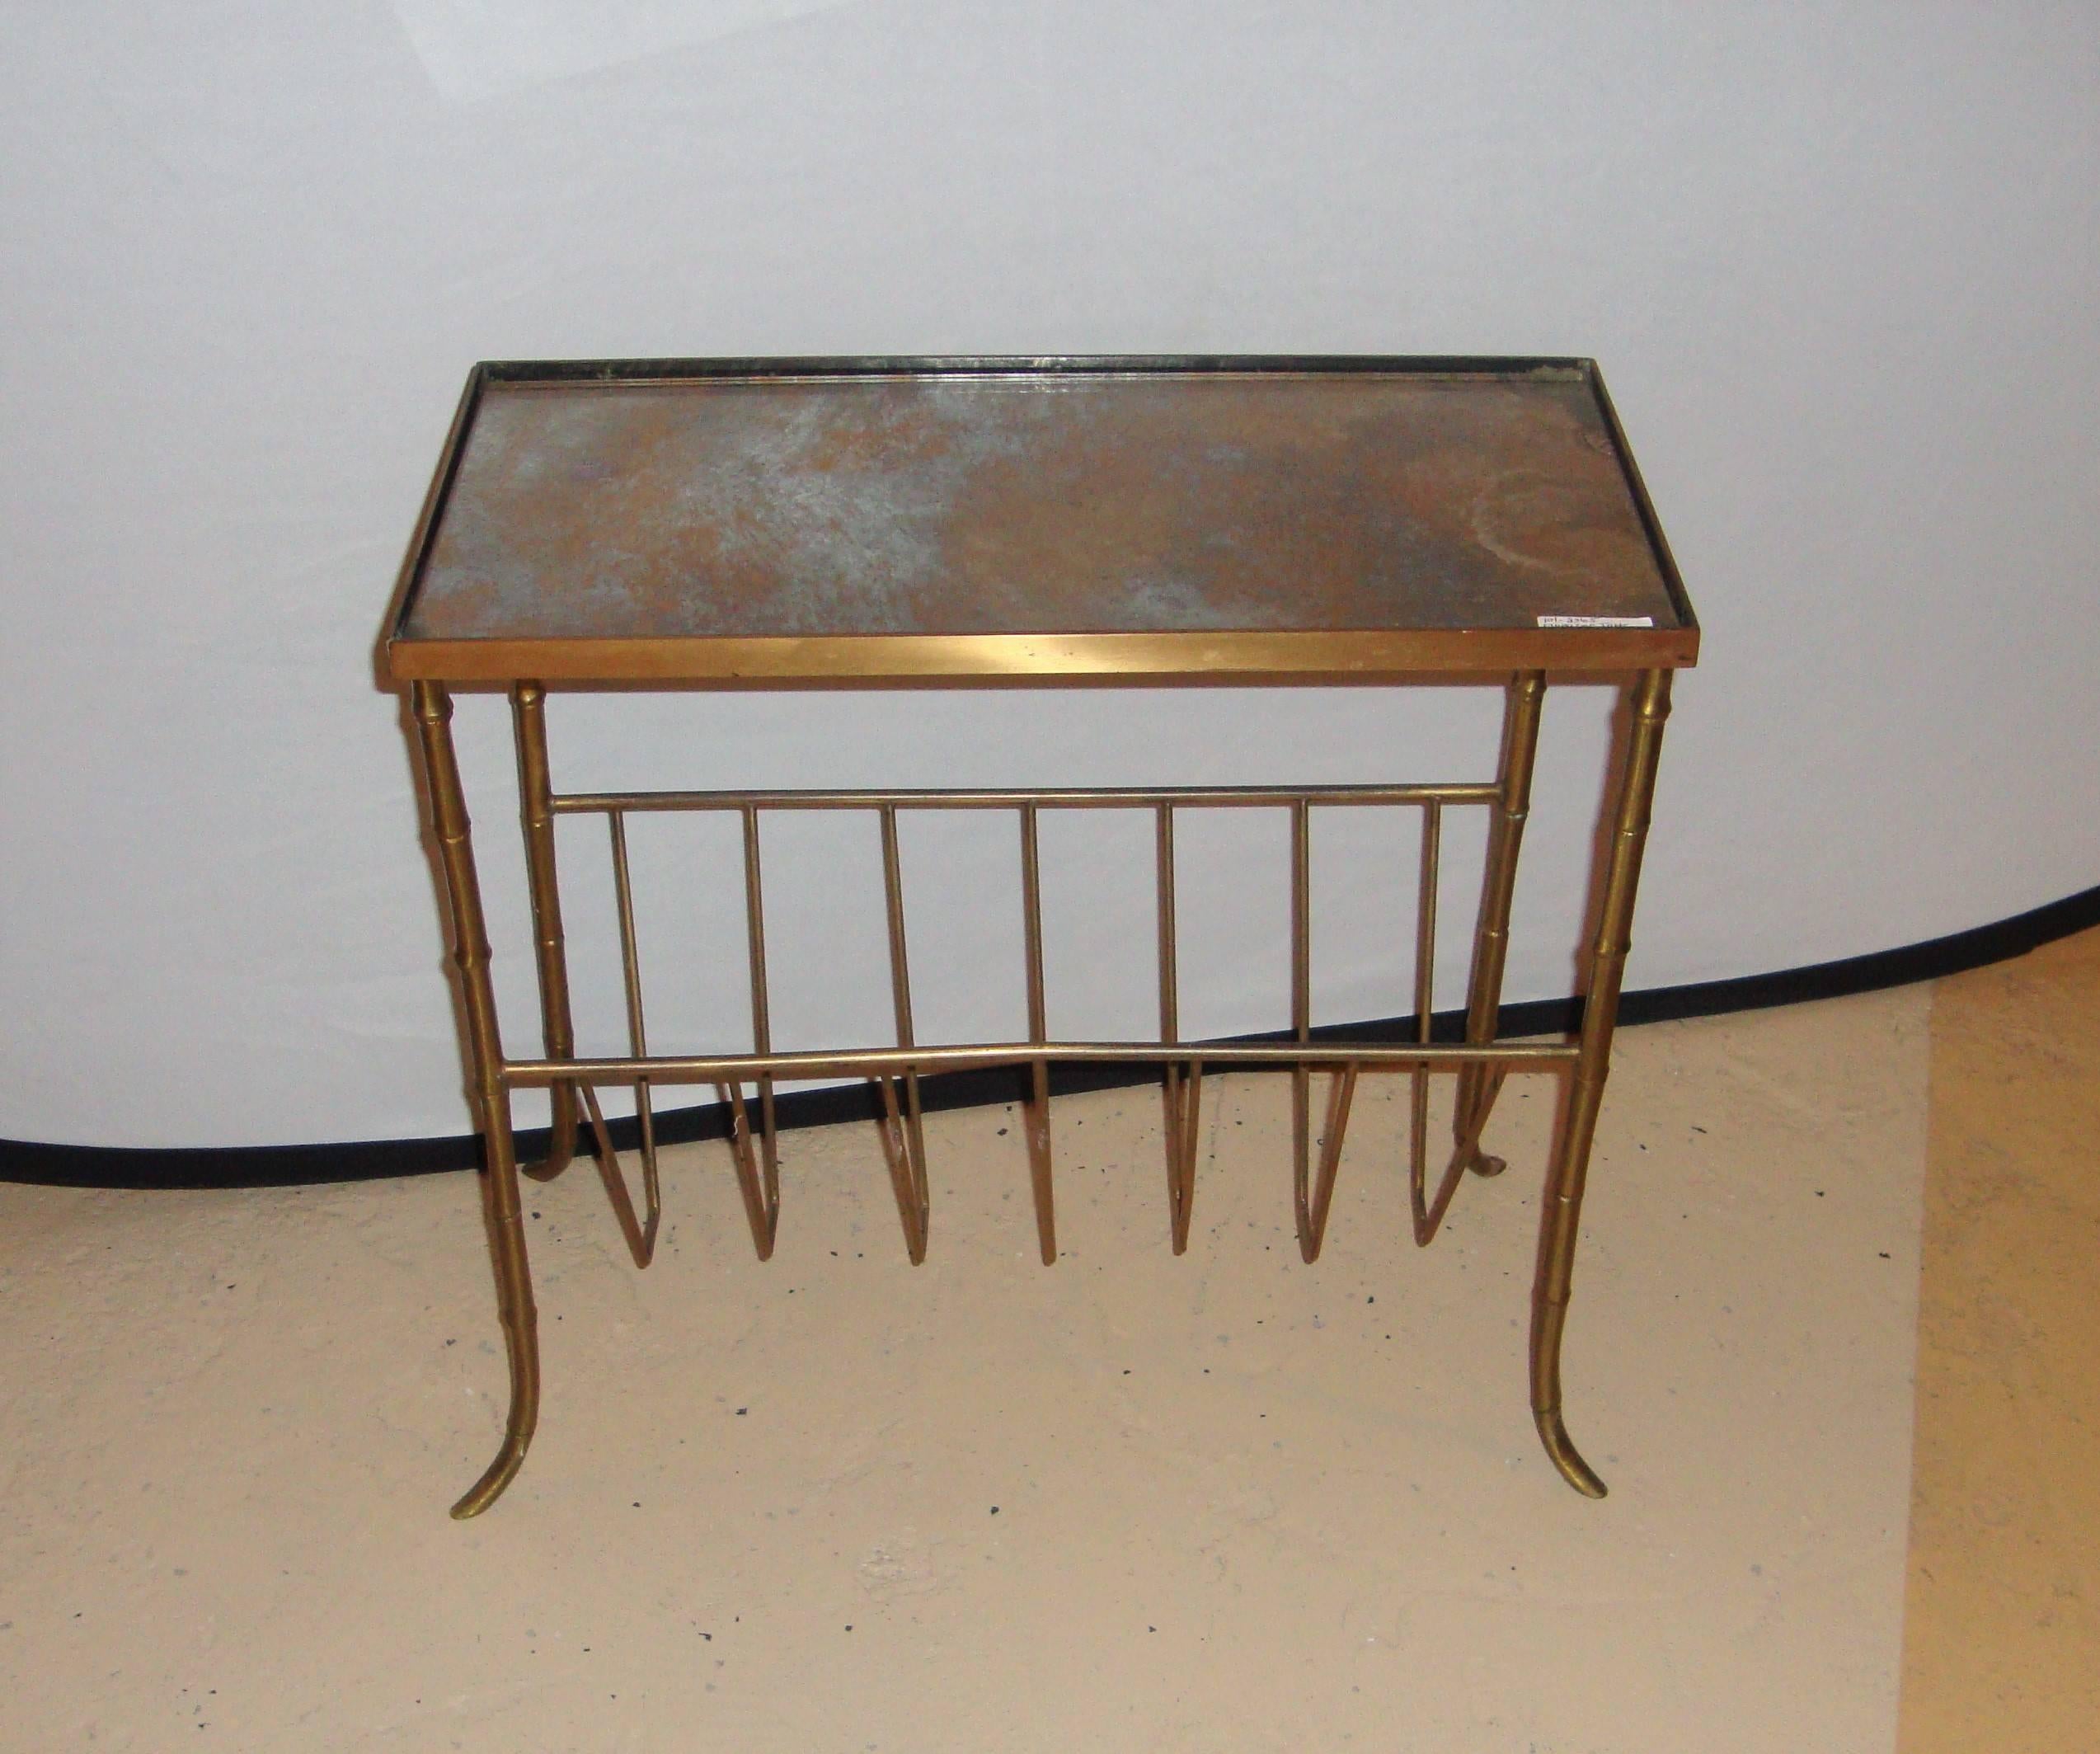 An elegant Bagues style bronze bamboo form magazine table. Bronze with distressed gold gilt glass top, sitting on bamboo form legs.